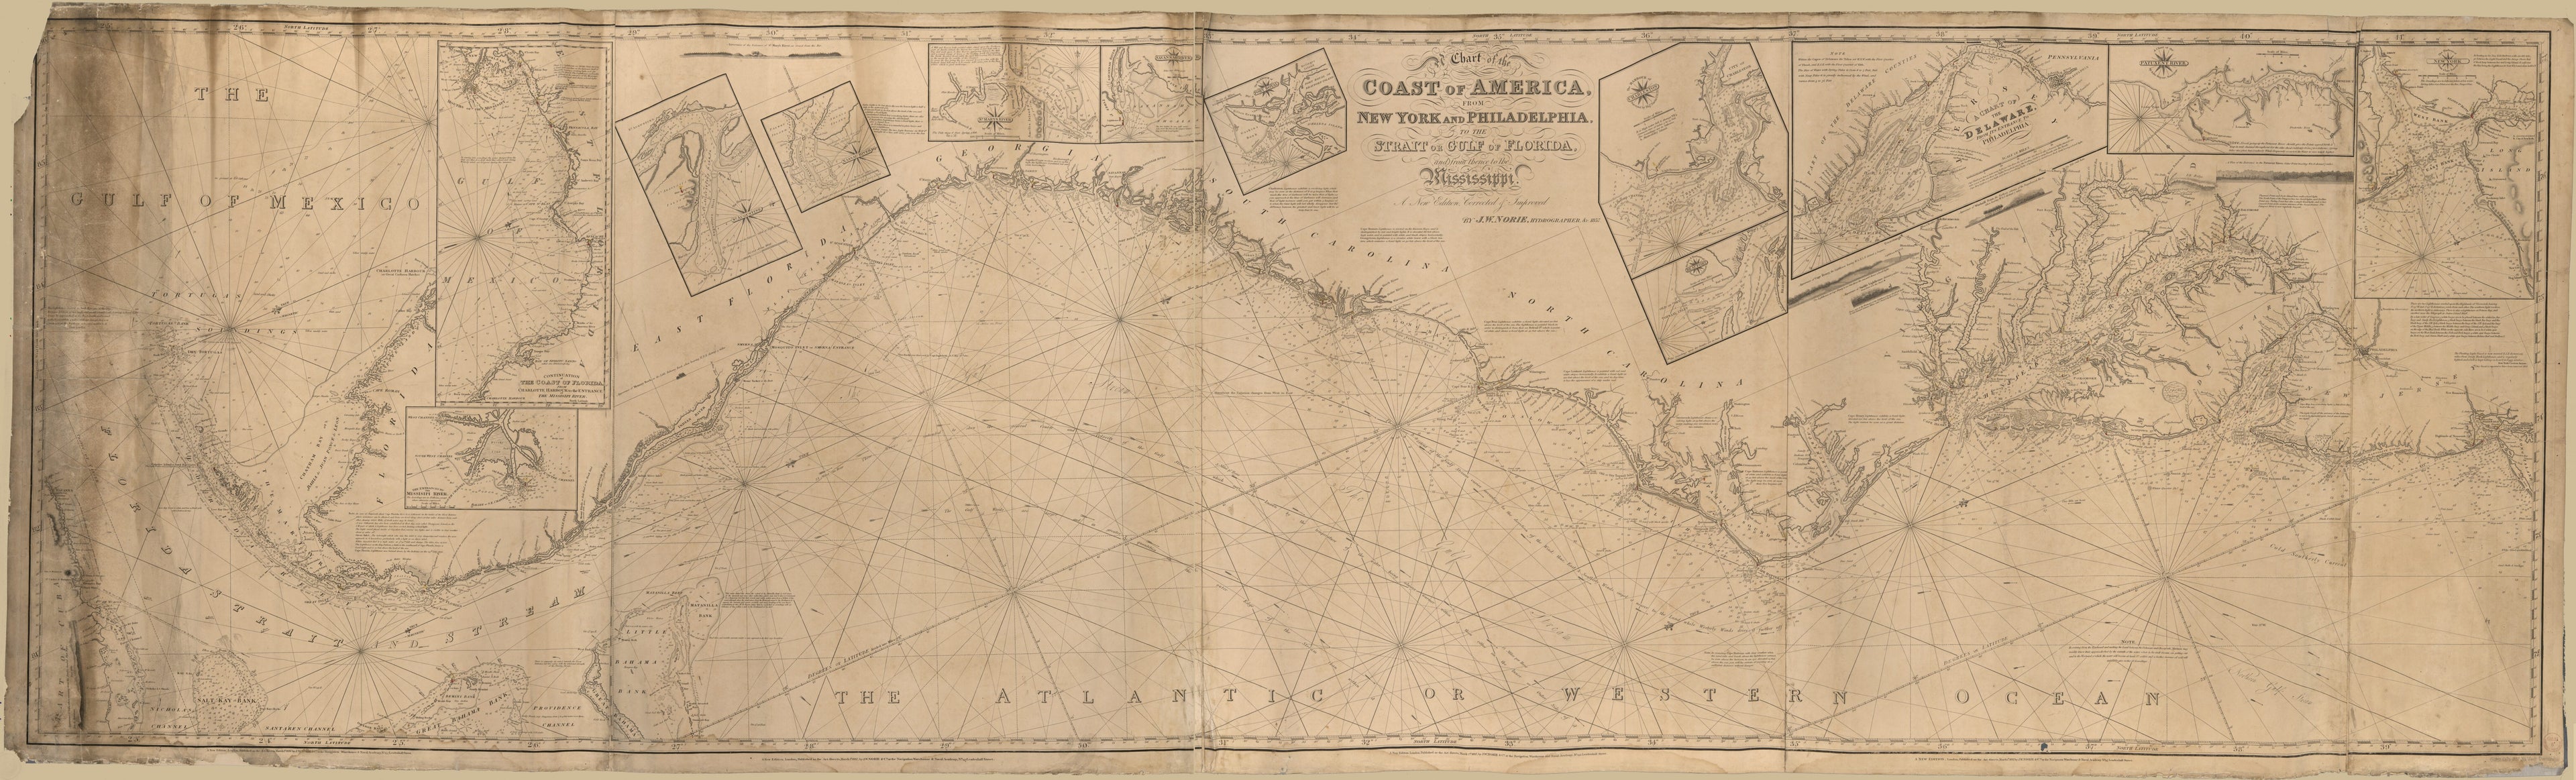 This old map of A Chart of the Coast of America : from New York and Philadelphia to the Strait Or Gulf of Florida, and from Thence to the Mississippi from 1837 was created by  J.W. Norie &amp; Co, J. W. (John William) Norie in 1837